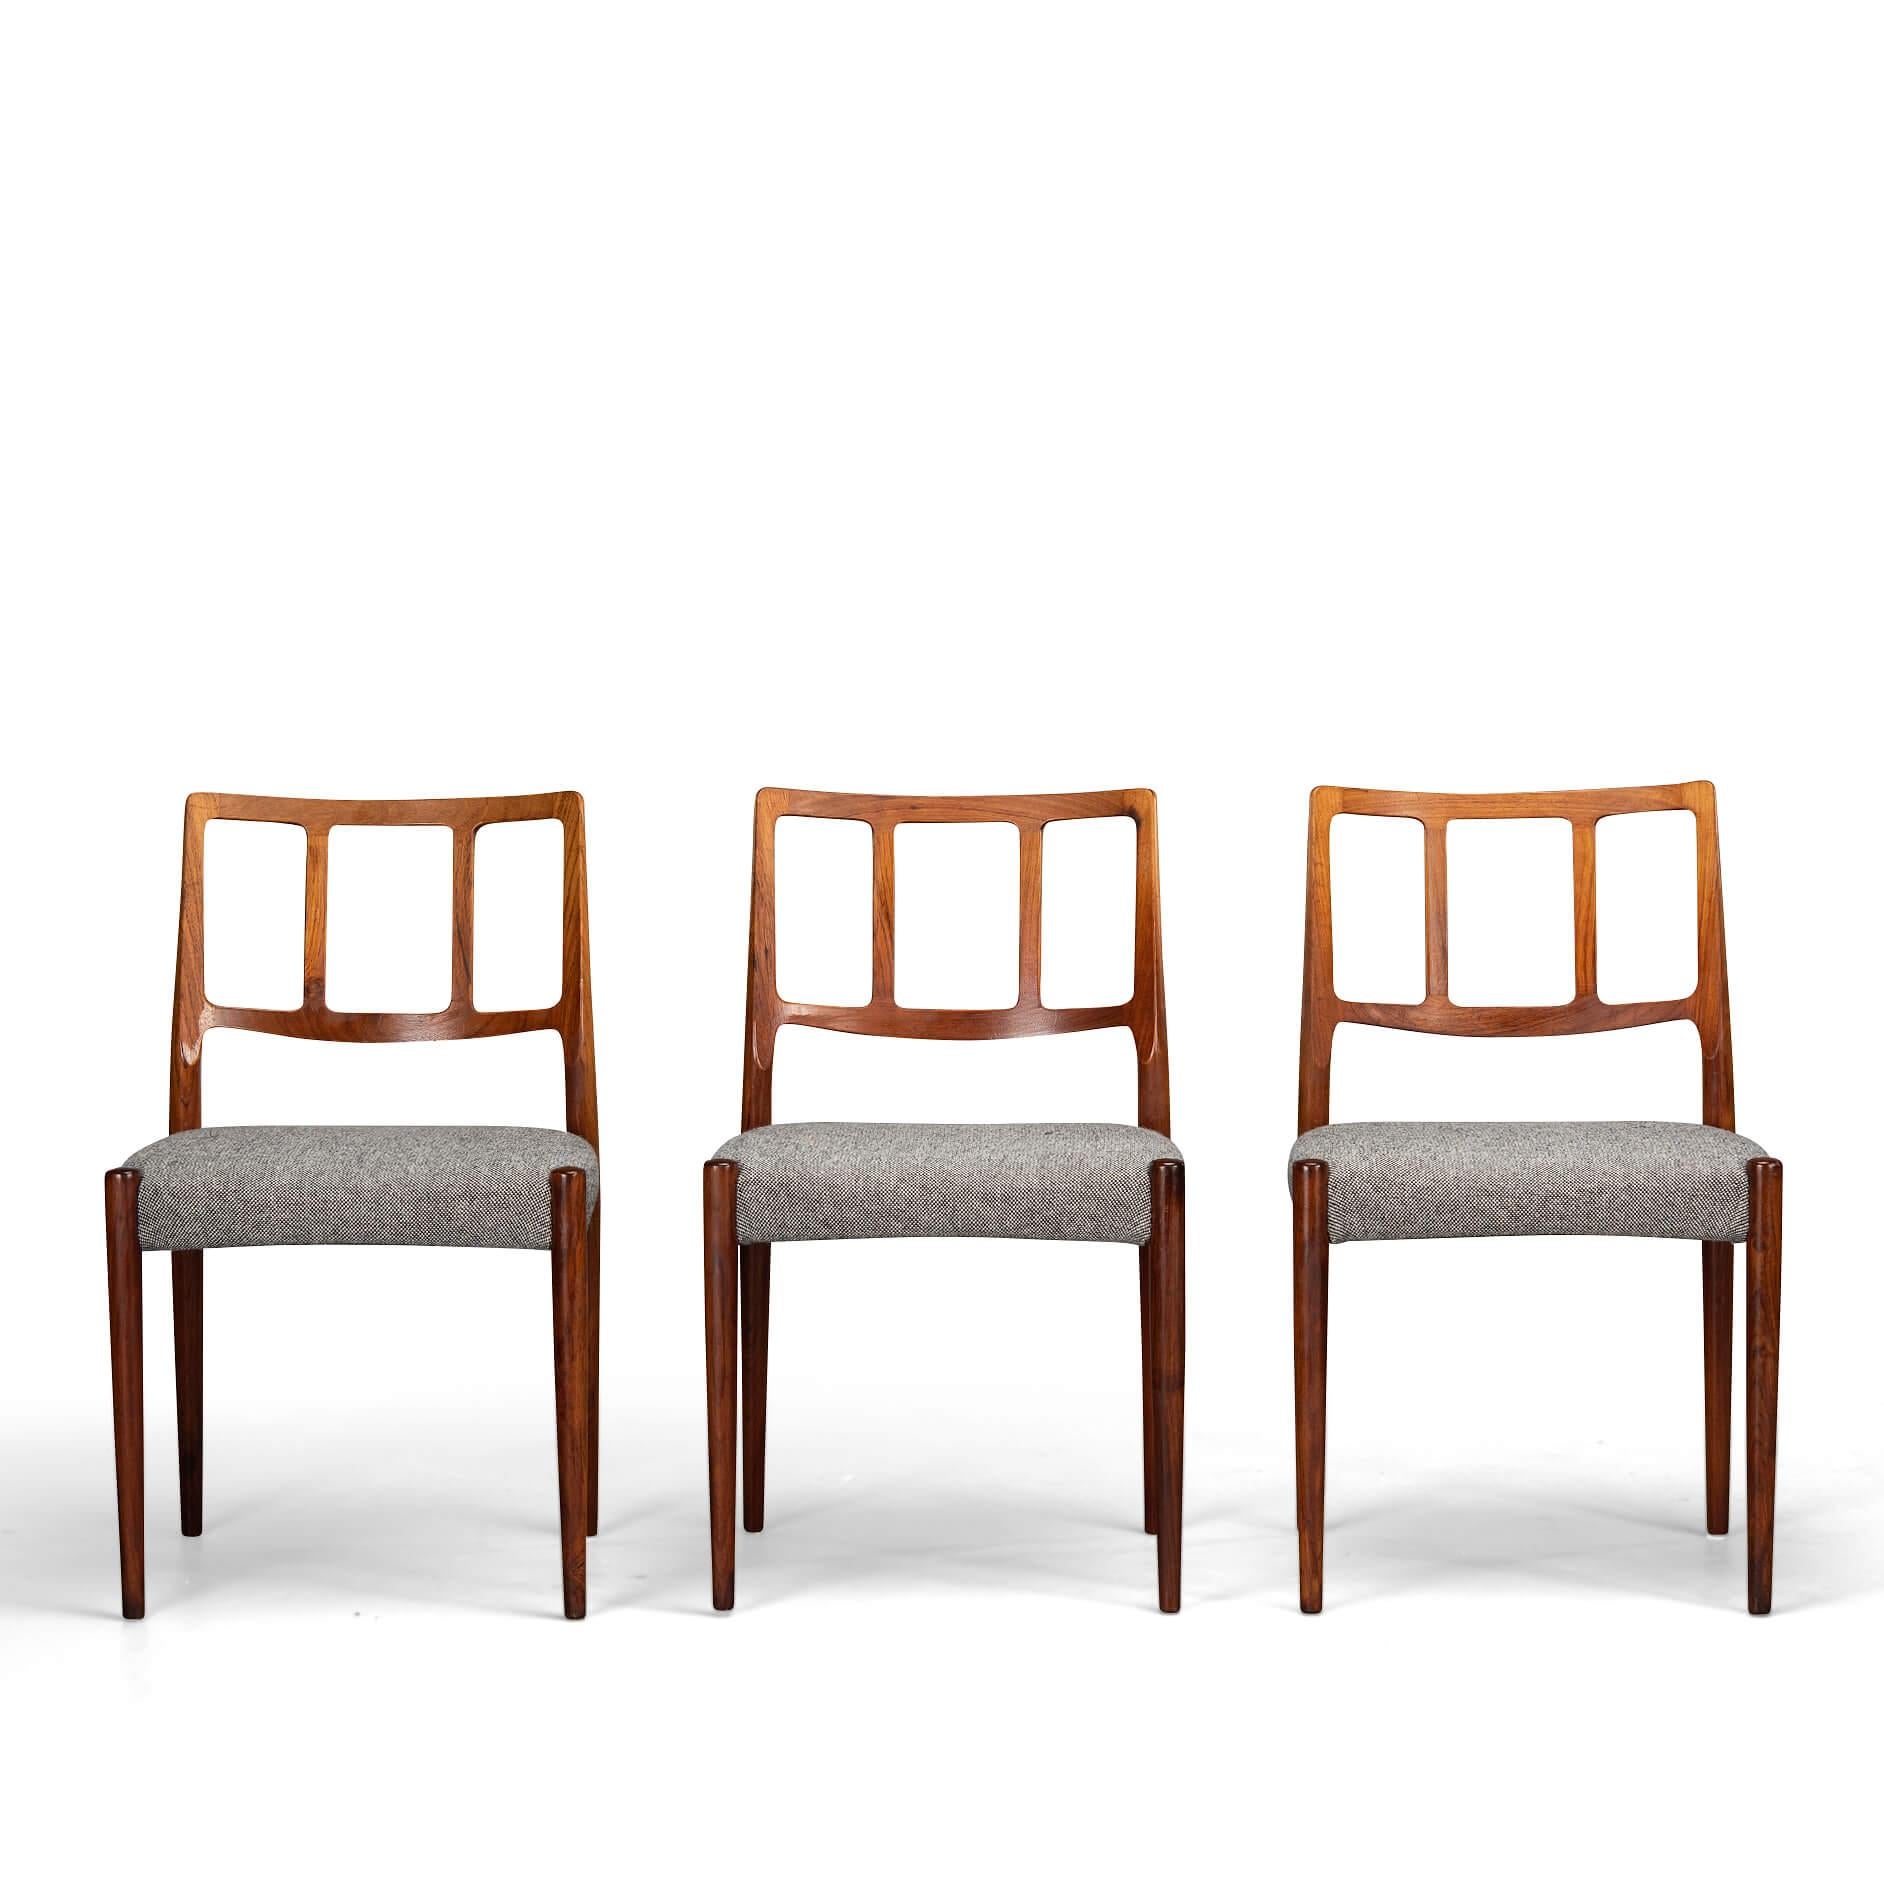 Reupholstered Rosewood Dining Chair by Johannes Andersen for Uldum, Set of 6 For Sale 4